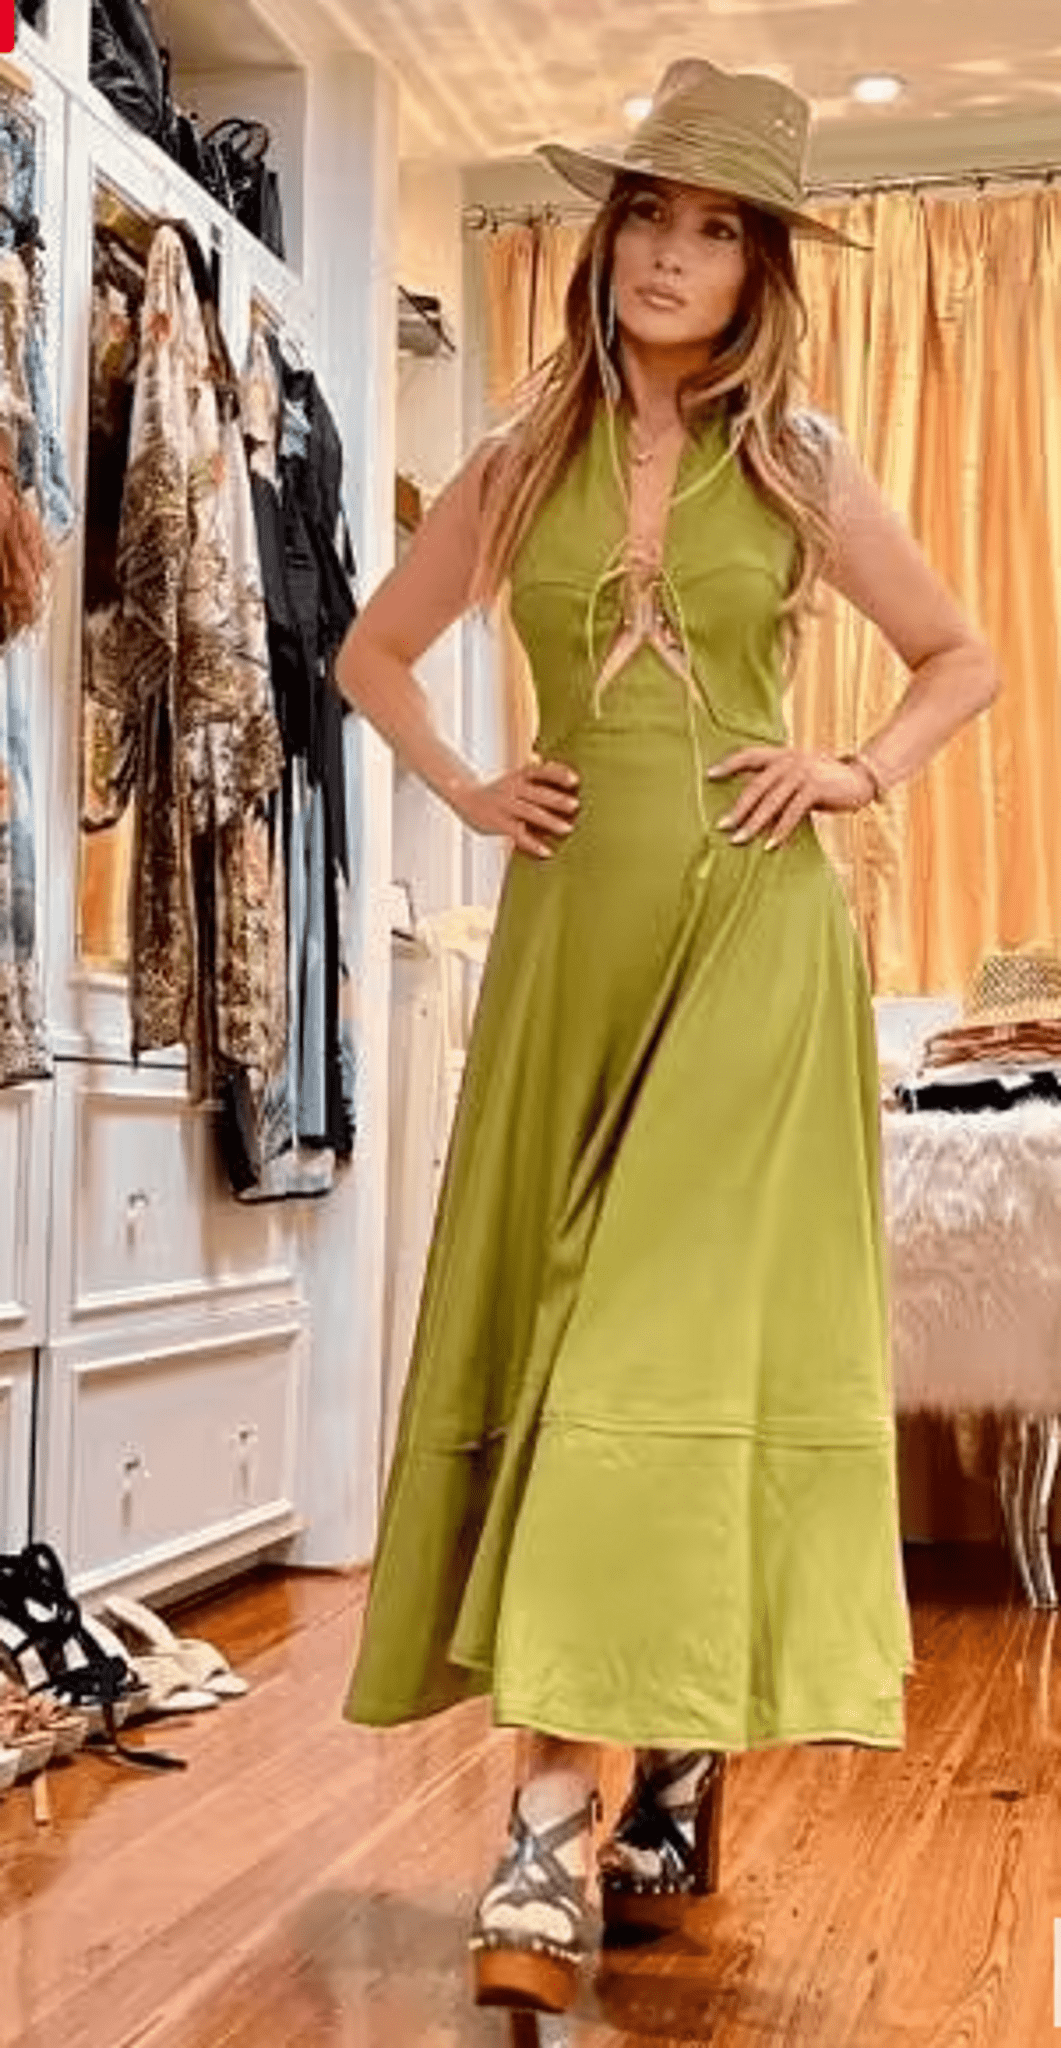 Jennifer Lopez chooses a maxi length - and does it spectacularly